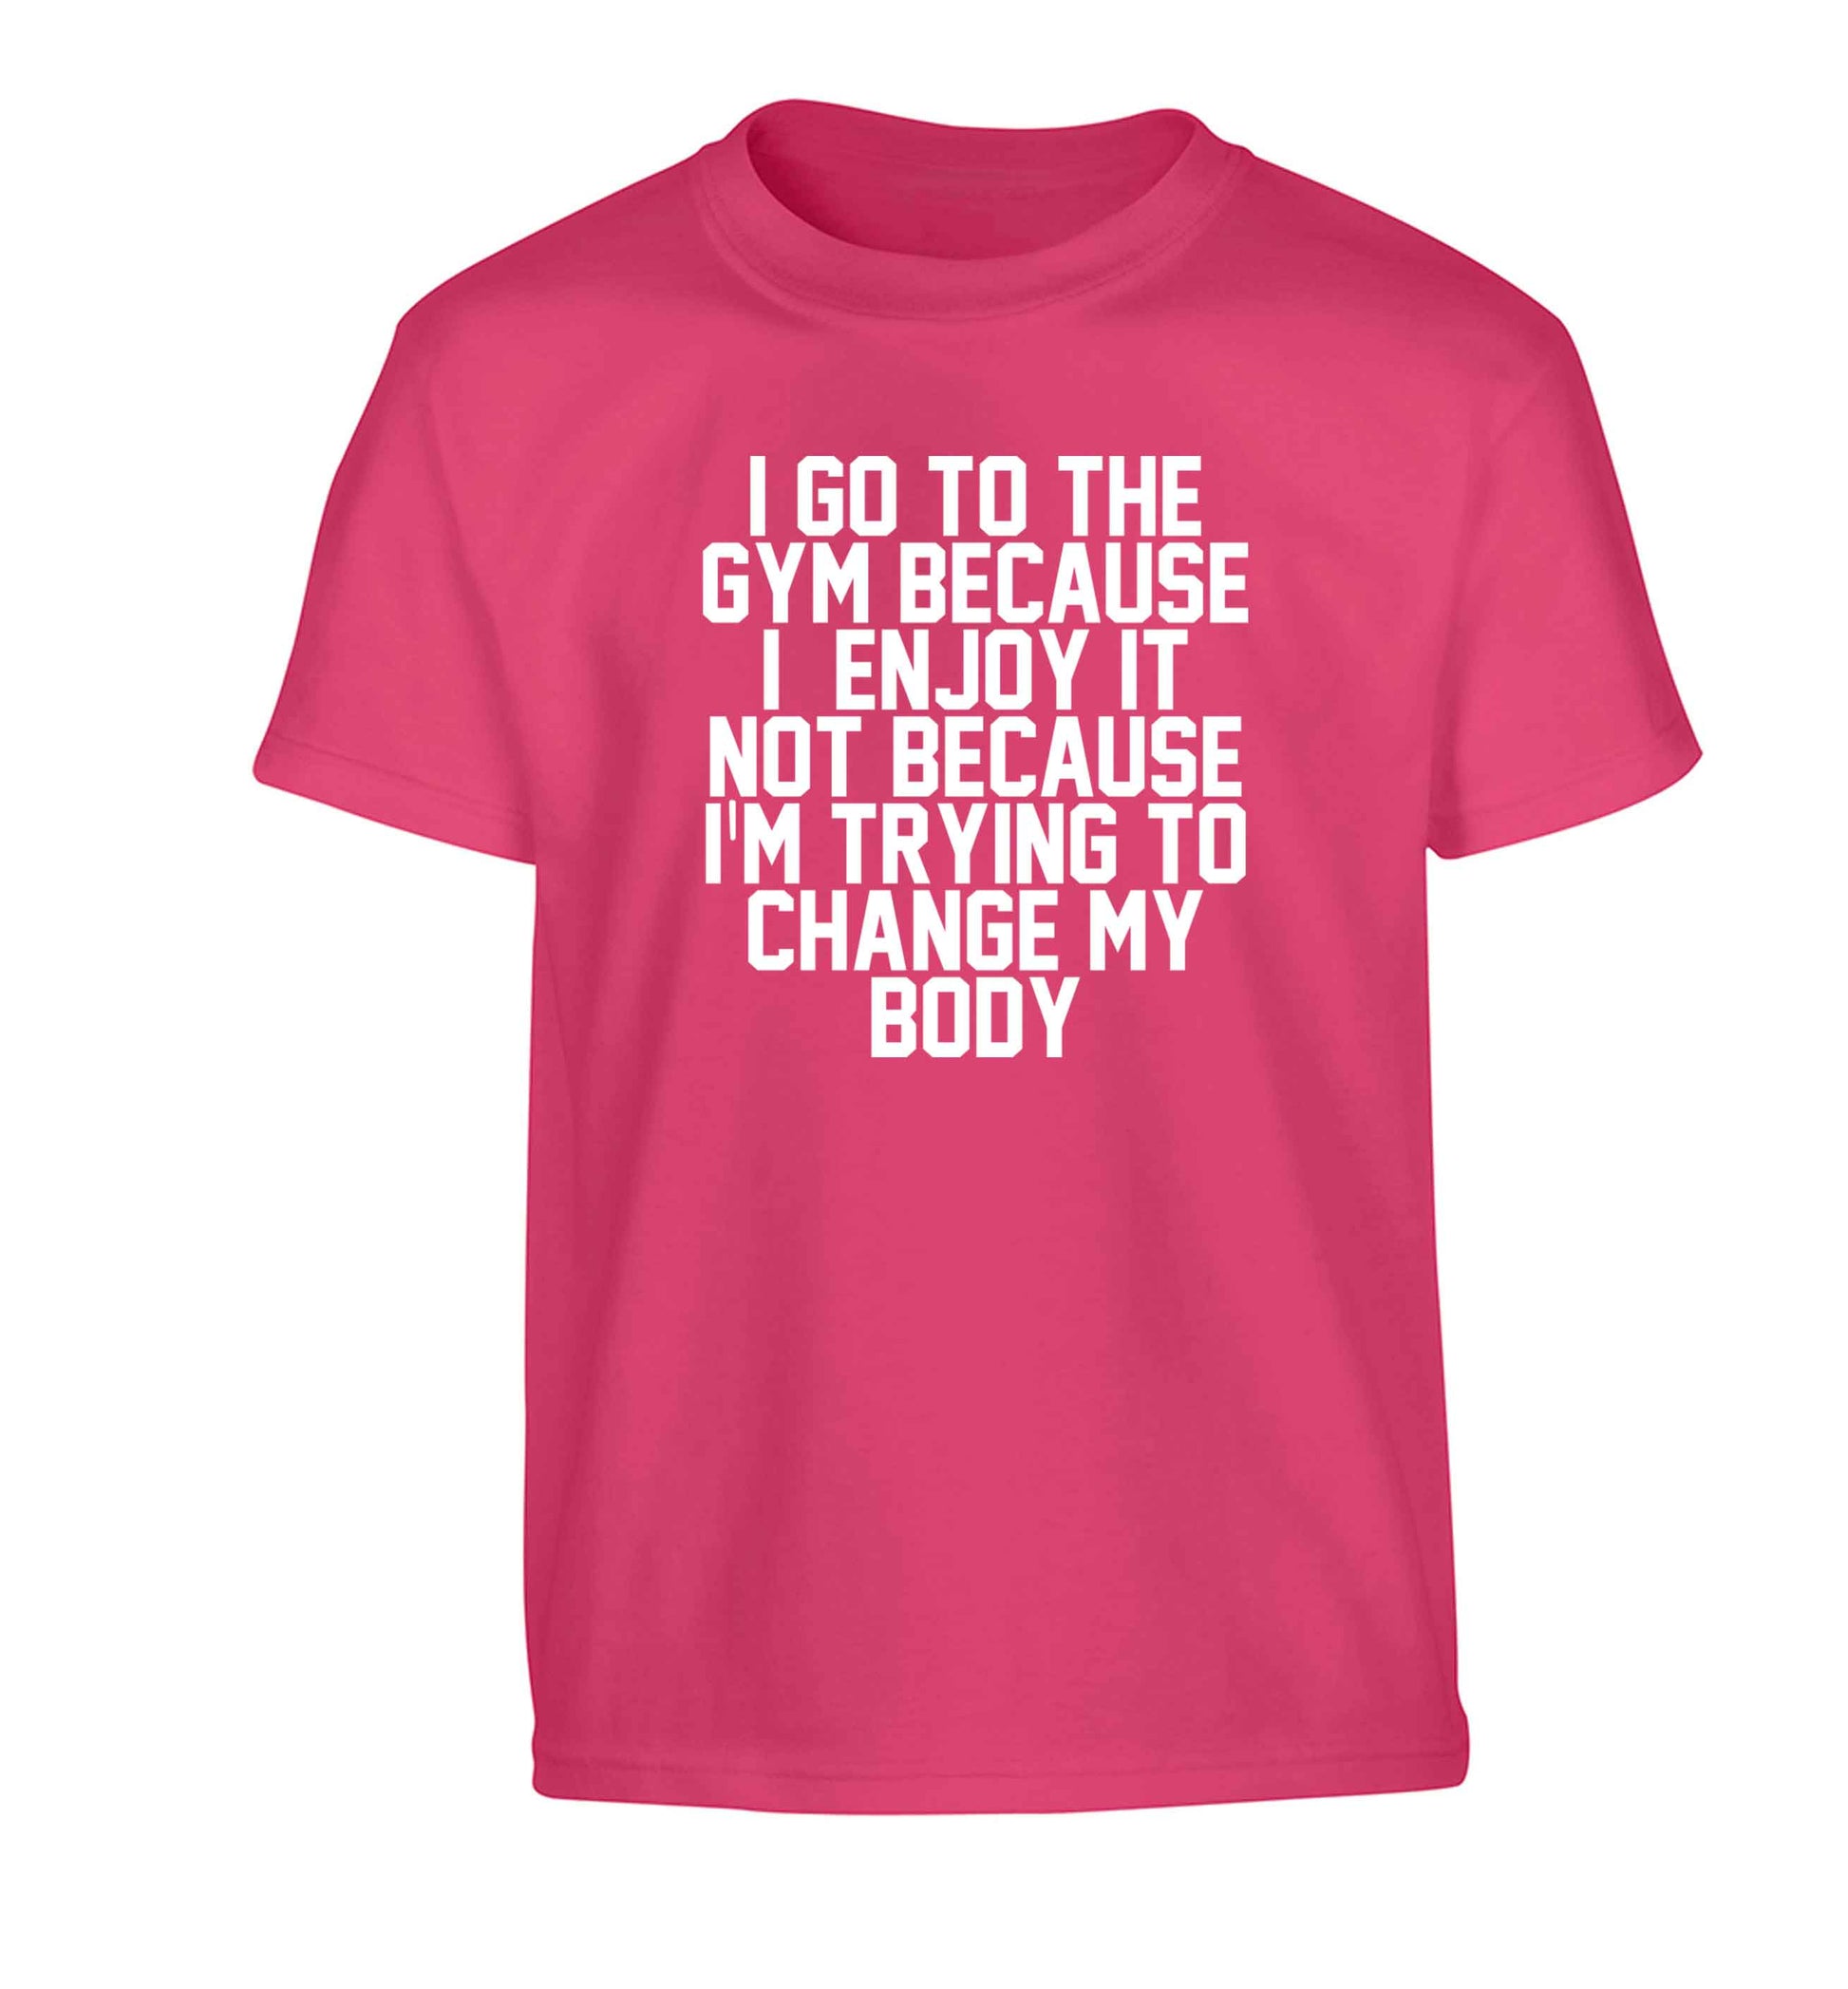 I go to the gym because I enjoy it not because I'm trying to change my body Children's pink Tshirt 12-13 Years